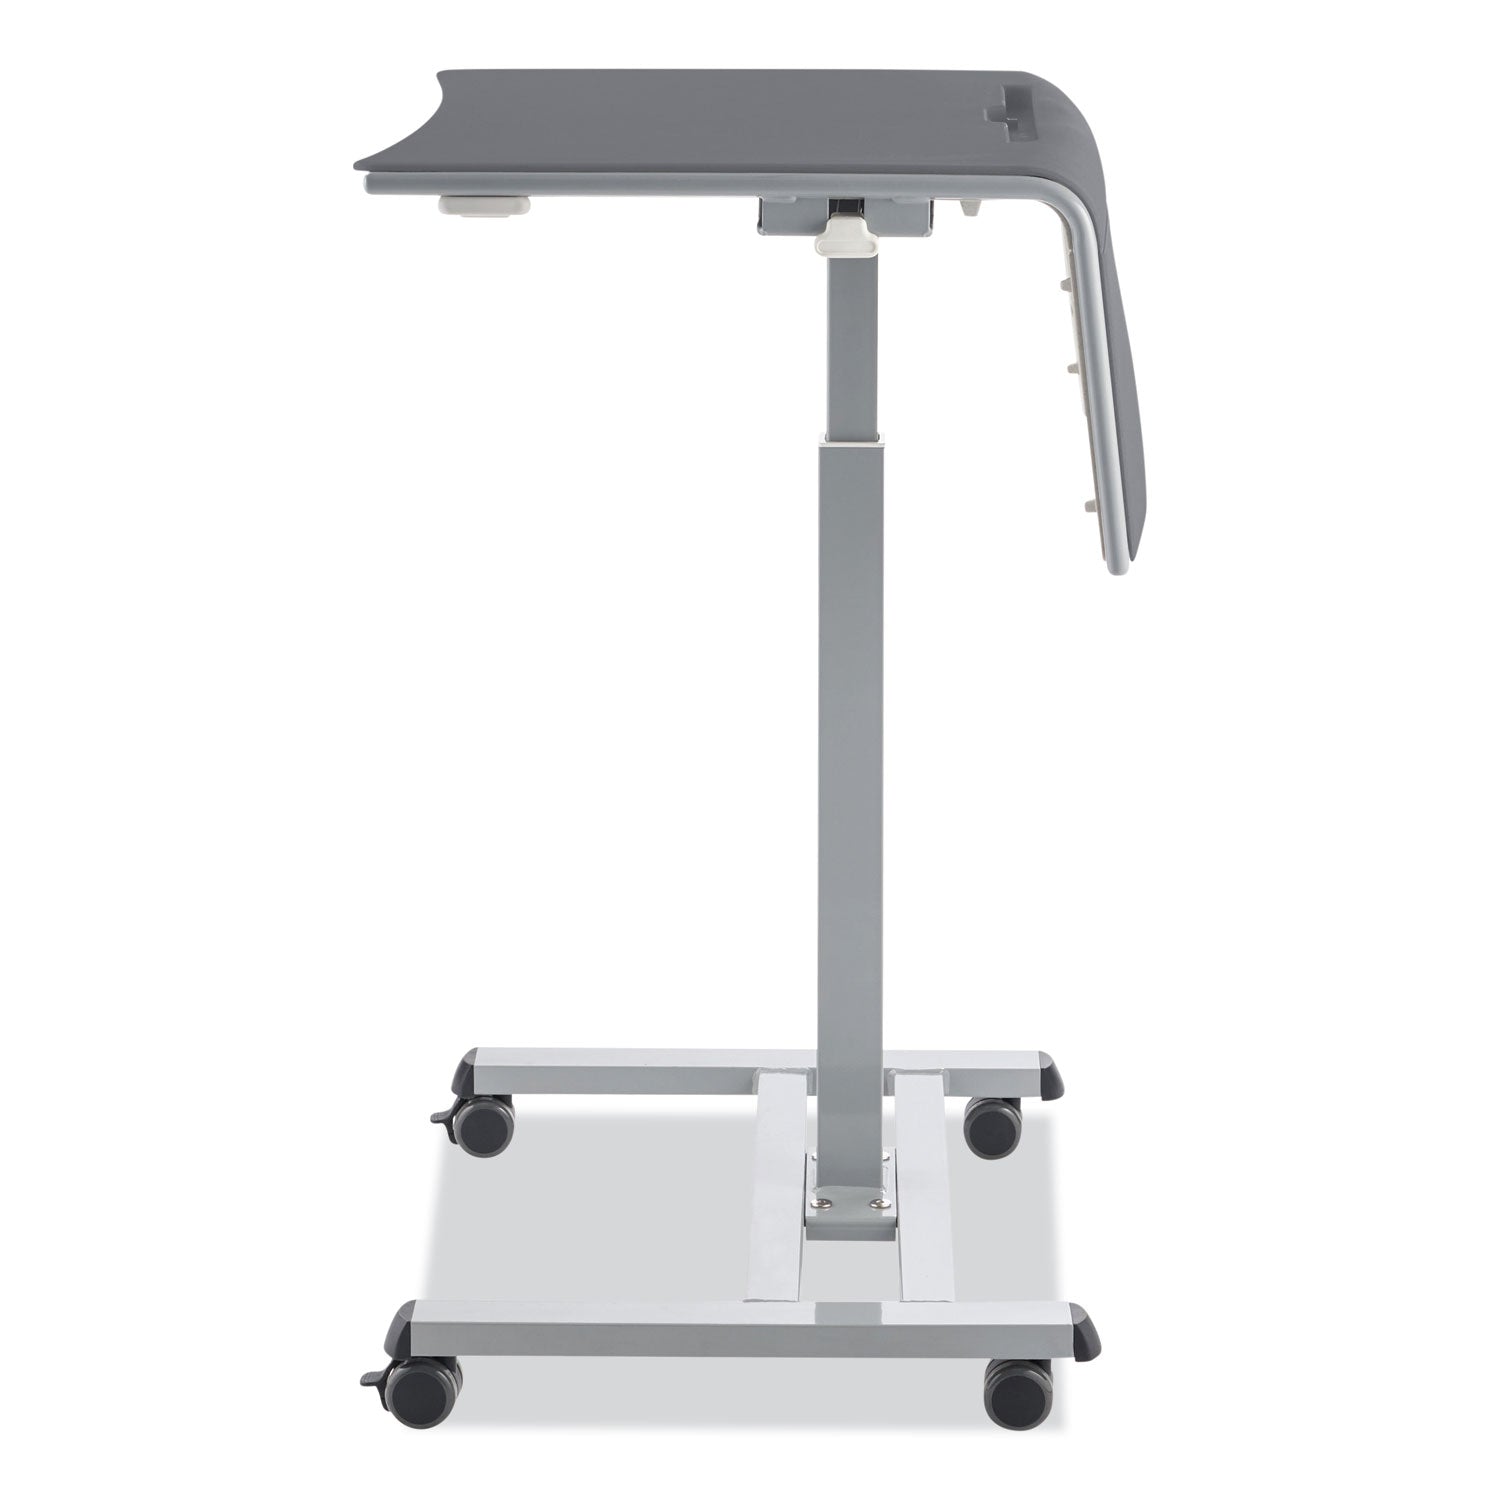 sit-stand-student-desk-pro-235-x-195-x-285-to-4175-charcoal-gray-ships-in-1-3-business-days_npsssdg20 - 4